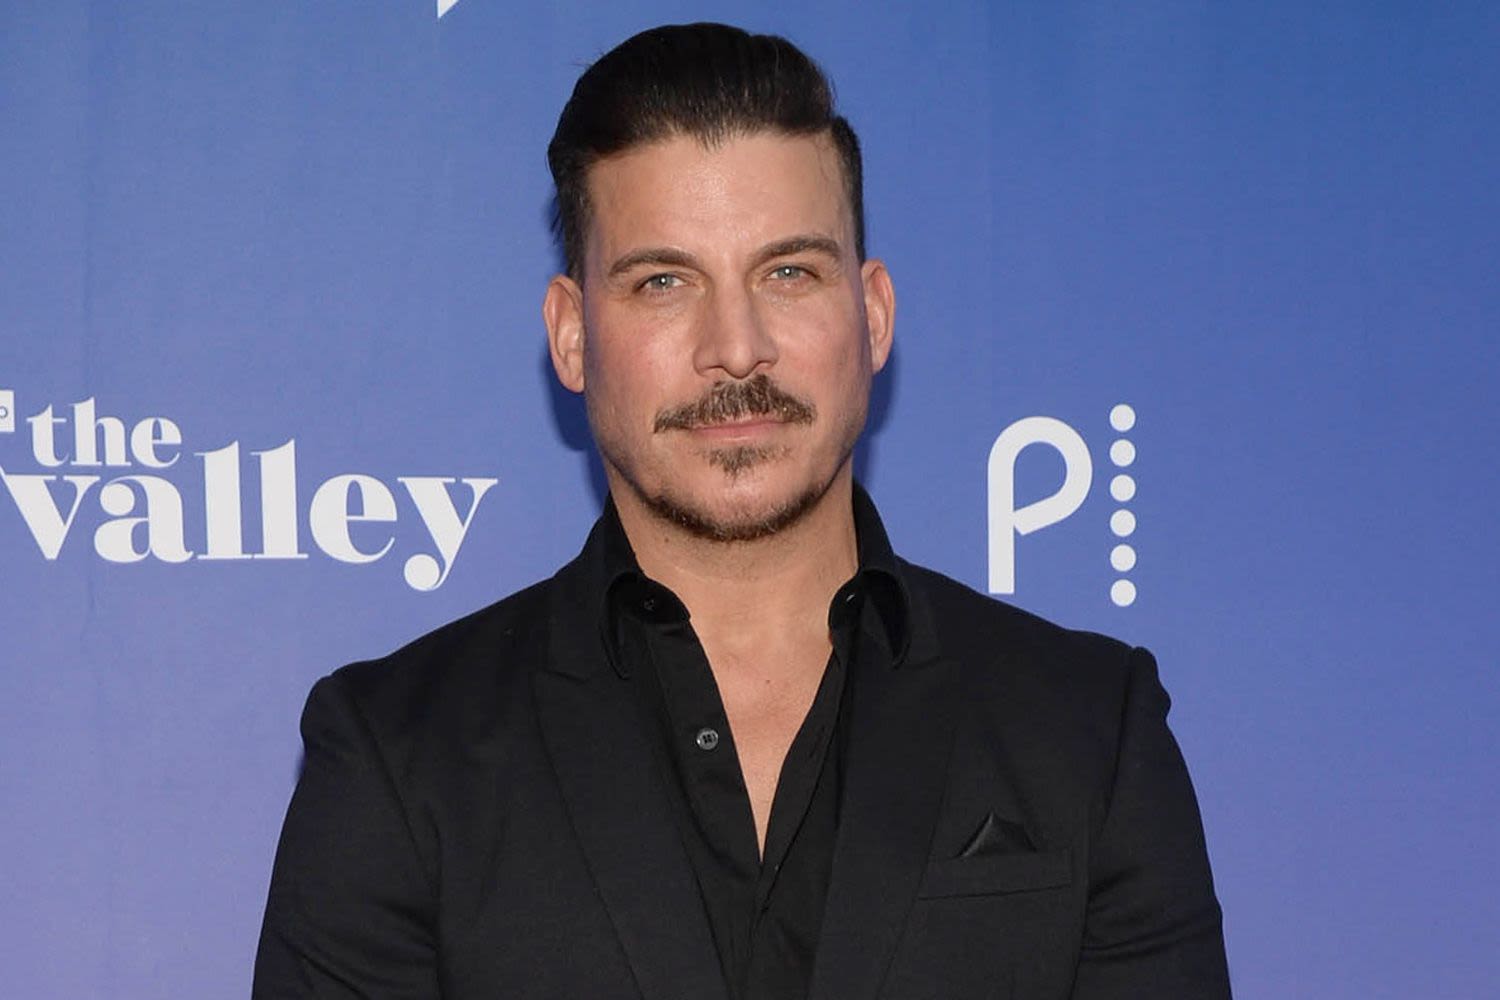 Jax Taylor Breaks Silence After Entering In-Patient Mental Health Facility, Says He Wants to Get 'Better' for His Son